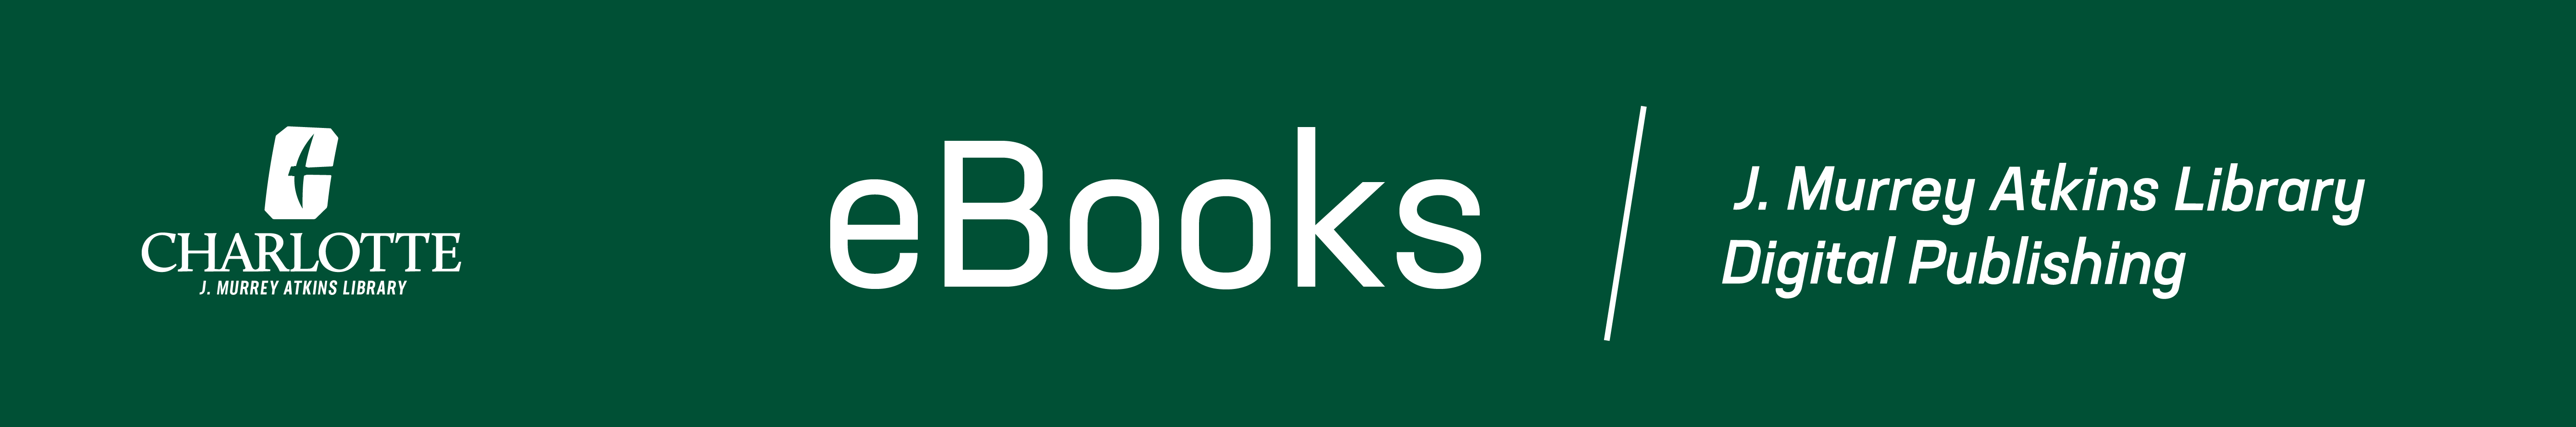 Atkins Library logo, with a header that says "Ebooks, J. Murrey Atkins Library Digital Publishing"